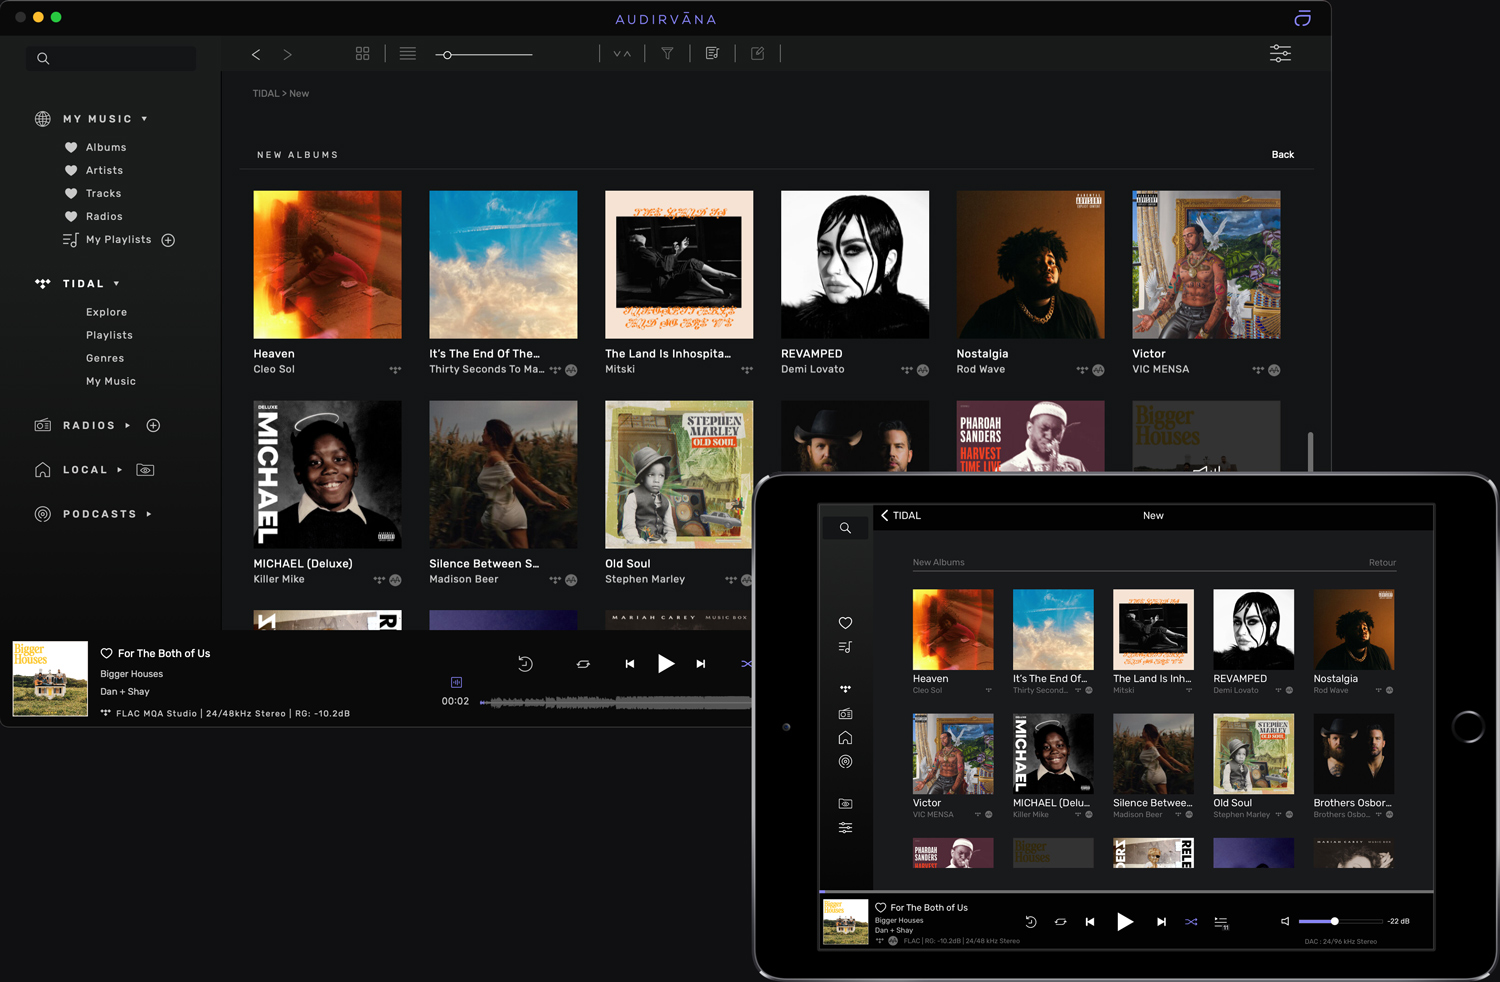  Best music player for mac audiophile - Audirvana.